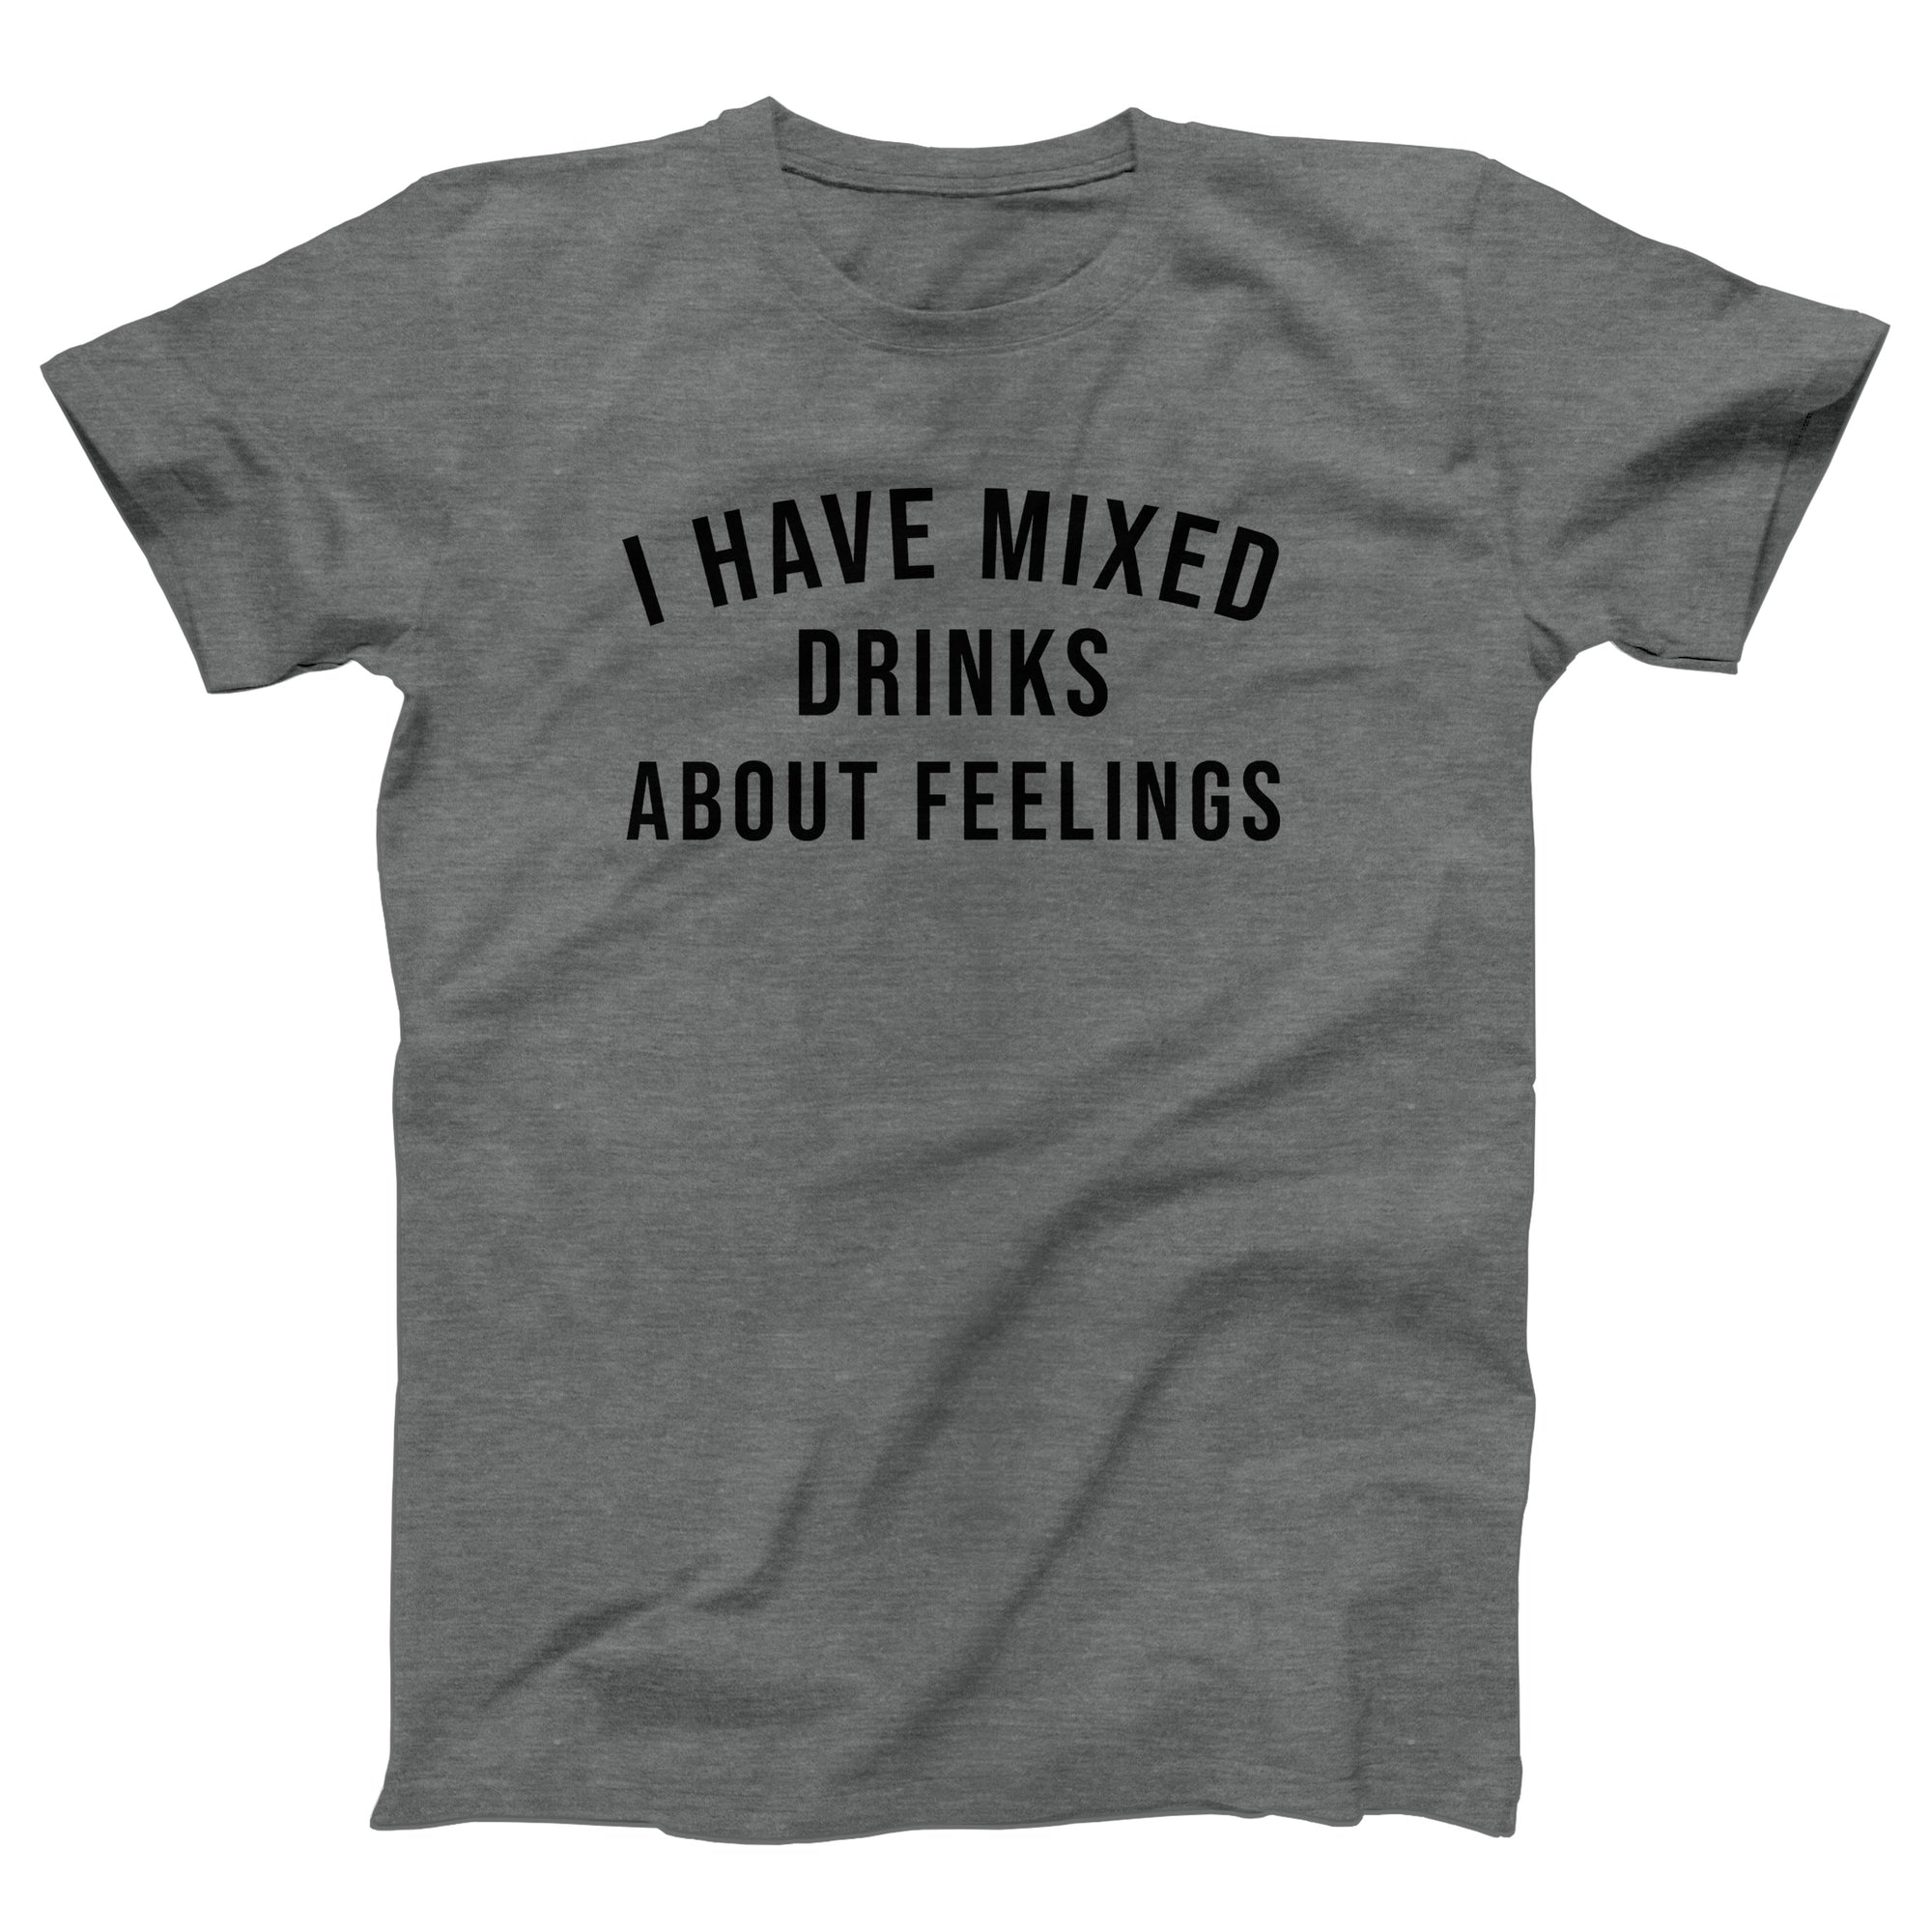 I Have Mixed Drinks About Feelings Adult Unisex T-Shirt - marionmartigny